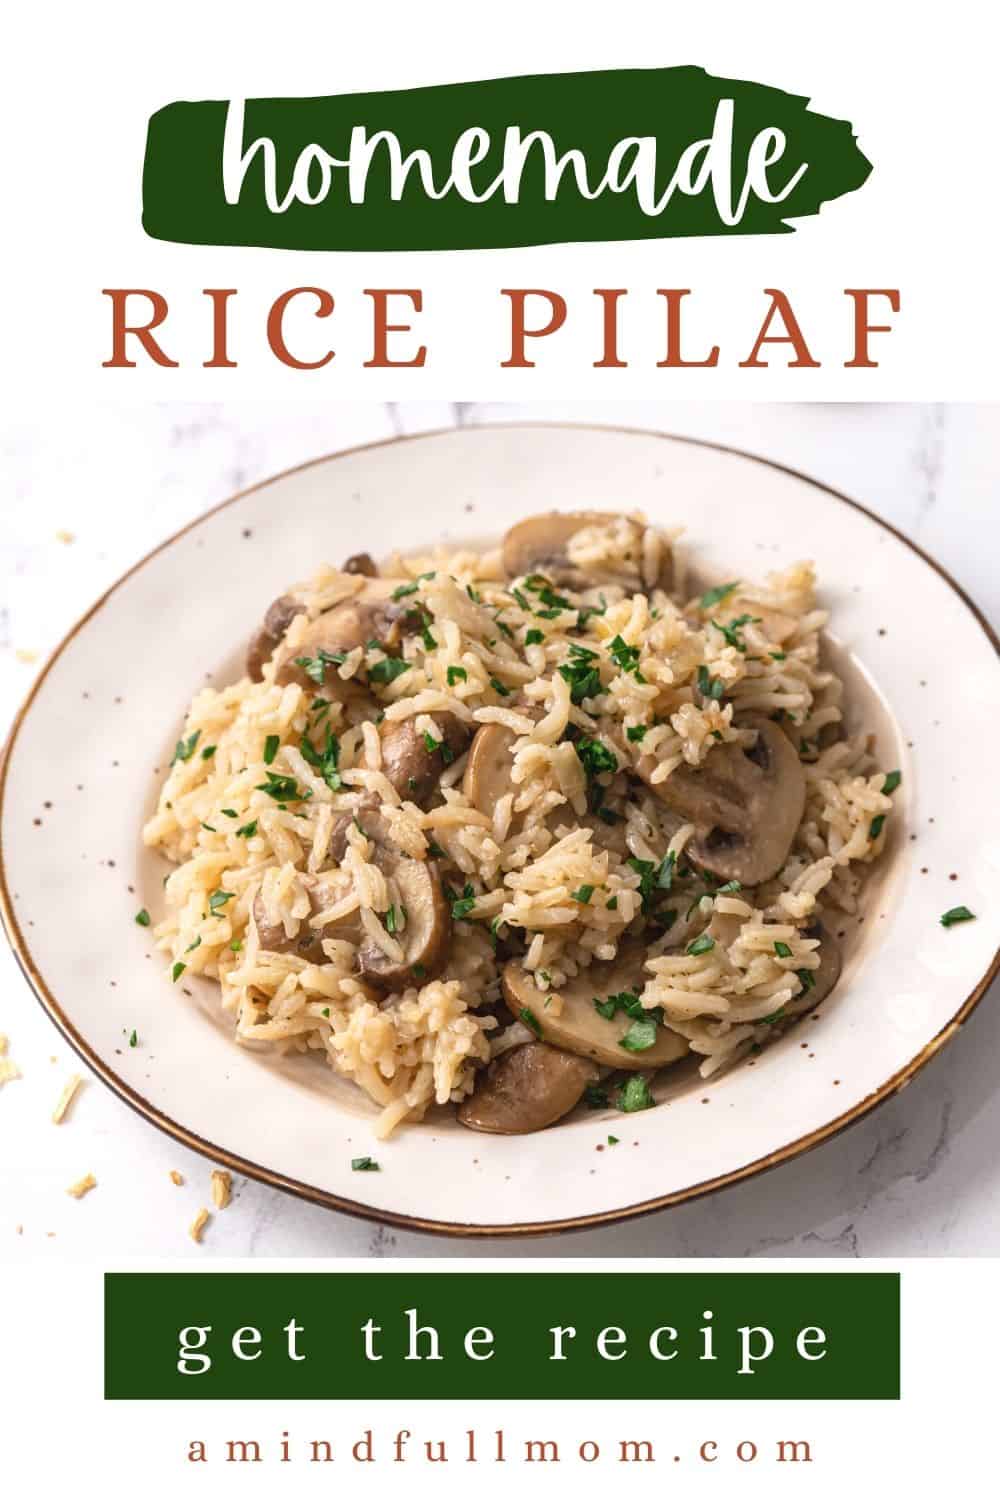 Ditch the box and make your own rice pilaf just as easily! This recipe for Rice Pilaf is made with toasted rice, mushrooms, and seasoned to perfection. It is the perfect side dish for any main course.